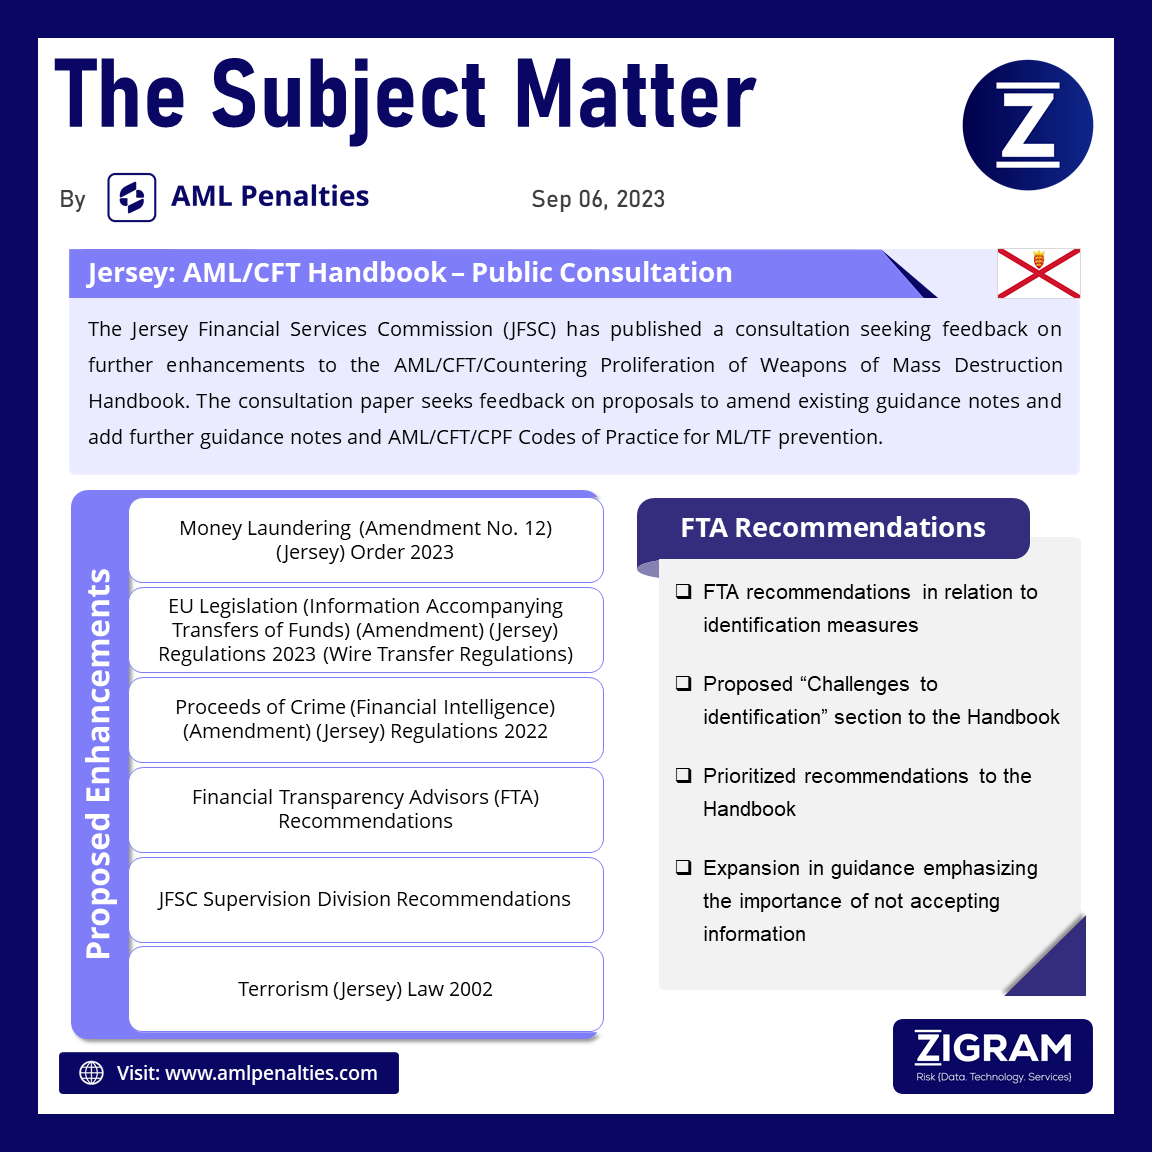 The Subject Matter by AML Penalties

Click to know more: shorturl.at/acwA0

Sign-up @ app.amlpenalties.com/sign-up

Visit us: zigram.tech

#compliance #amlpenalties #subjectmatter #aml #duediligence #proliferationfinancing #riskassessment #jfsc #publicconsultation